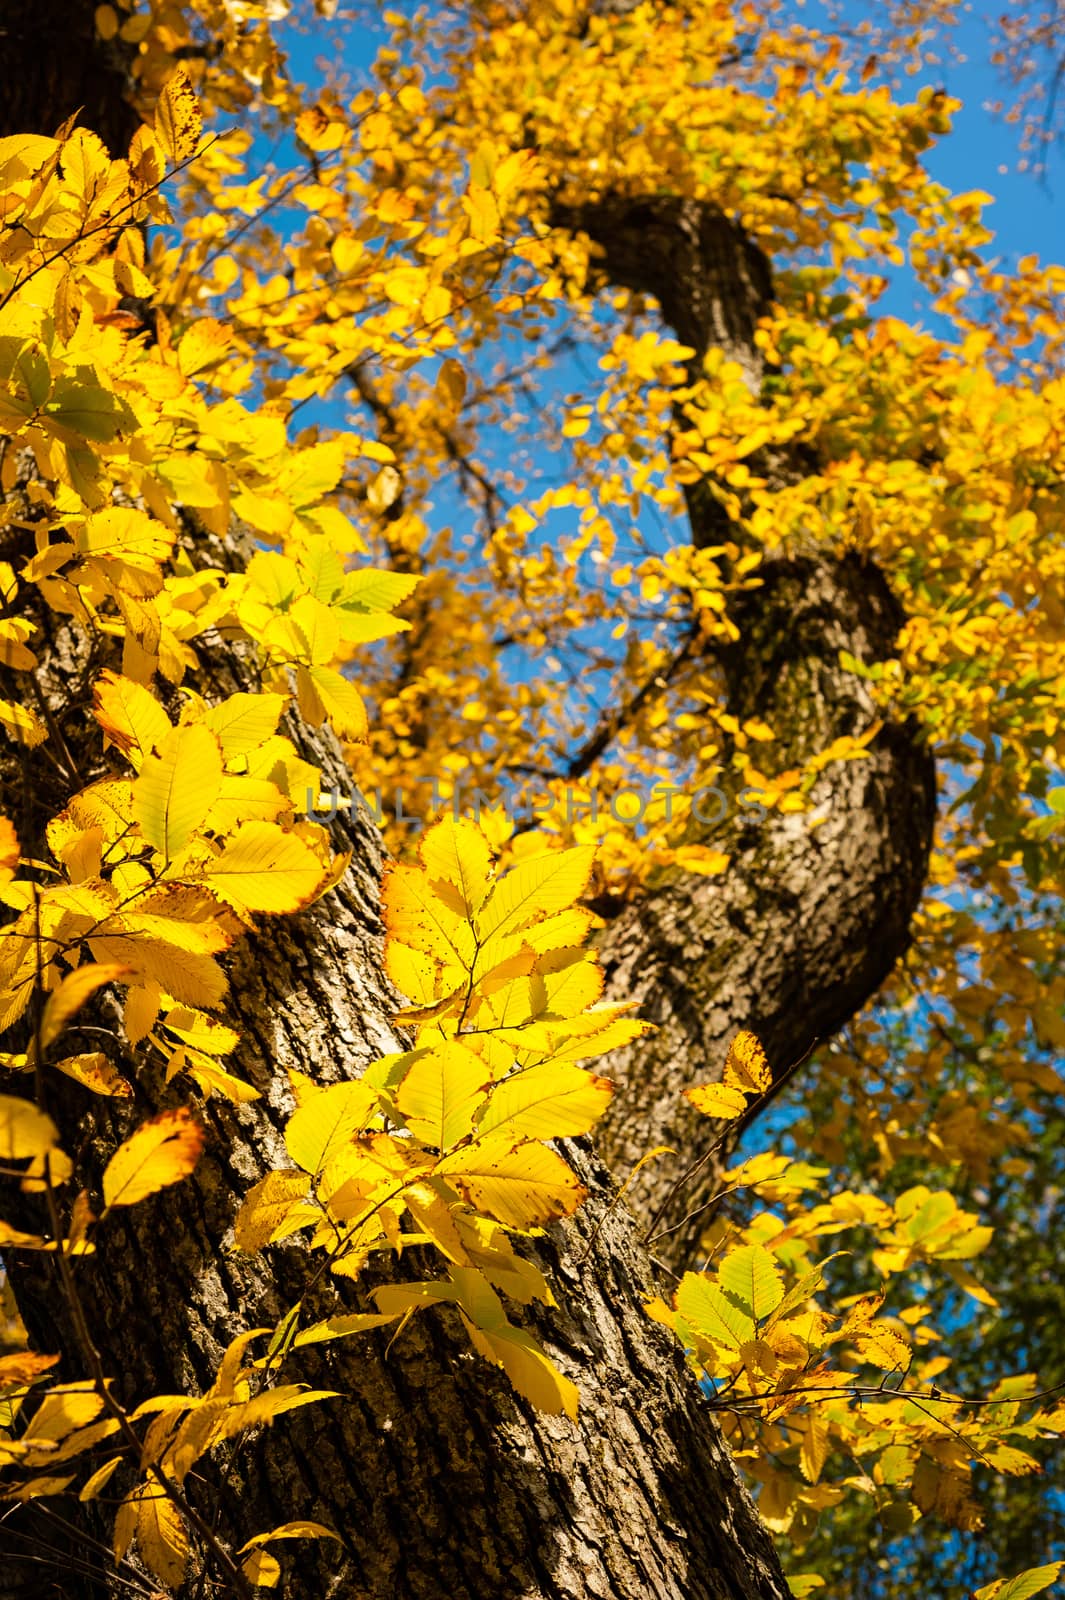 Beautiful tree with autumn yellow leaves against blue sky in Fal by chentim